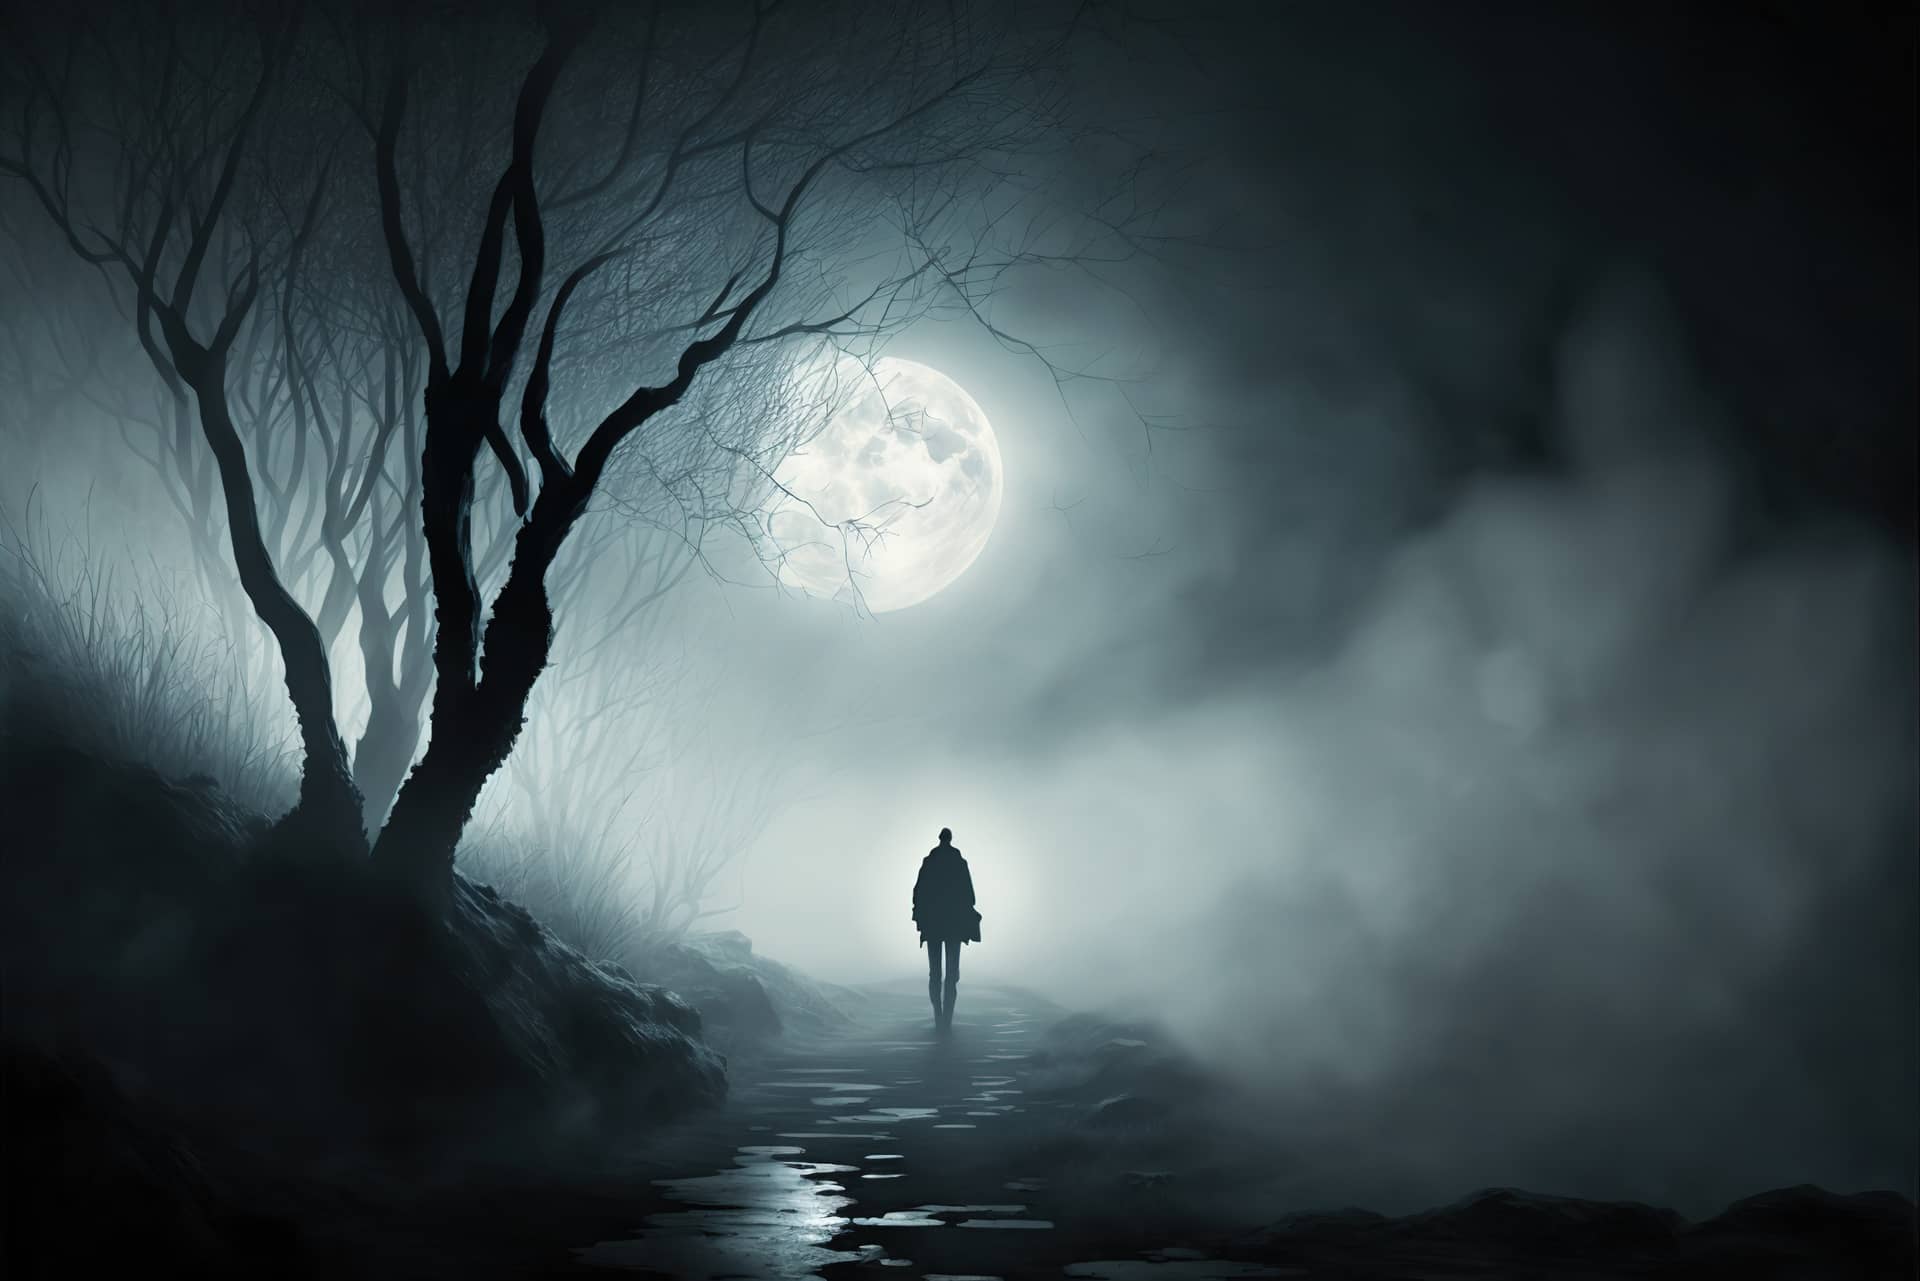 Person walking alone foggy night underneath pale moonlight image